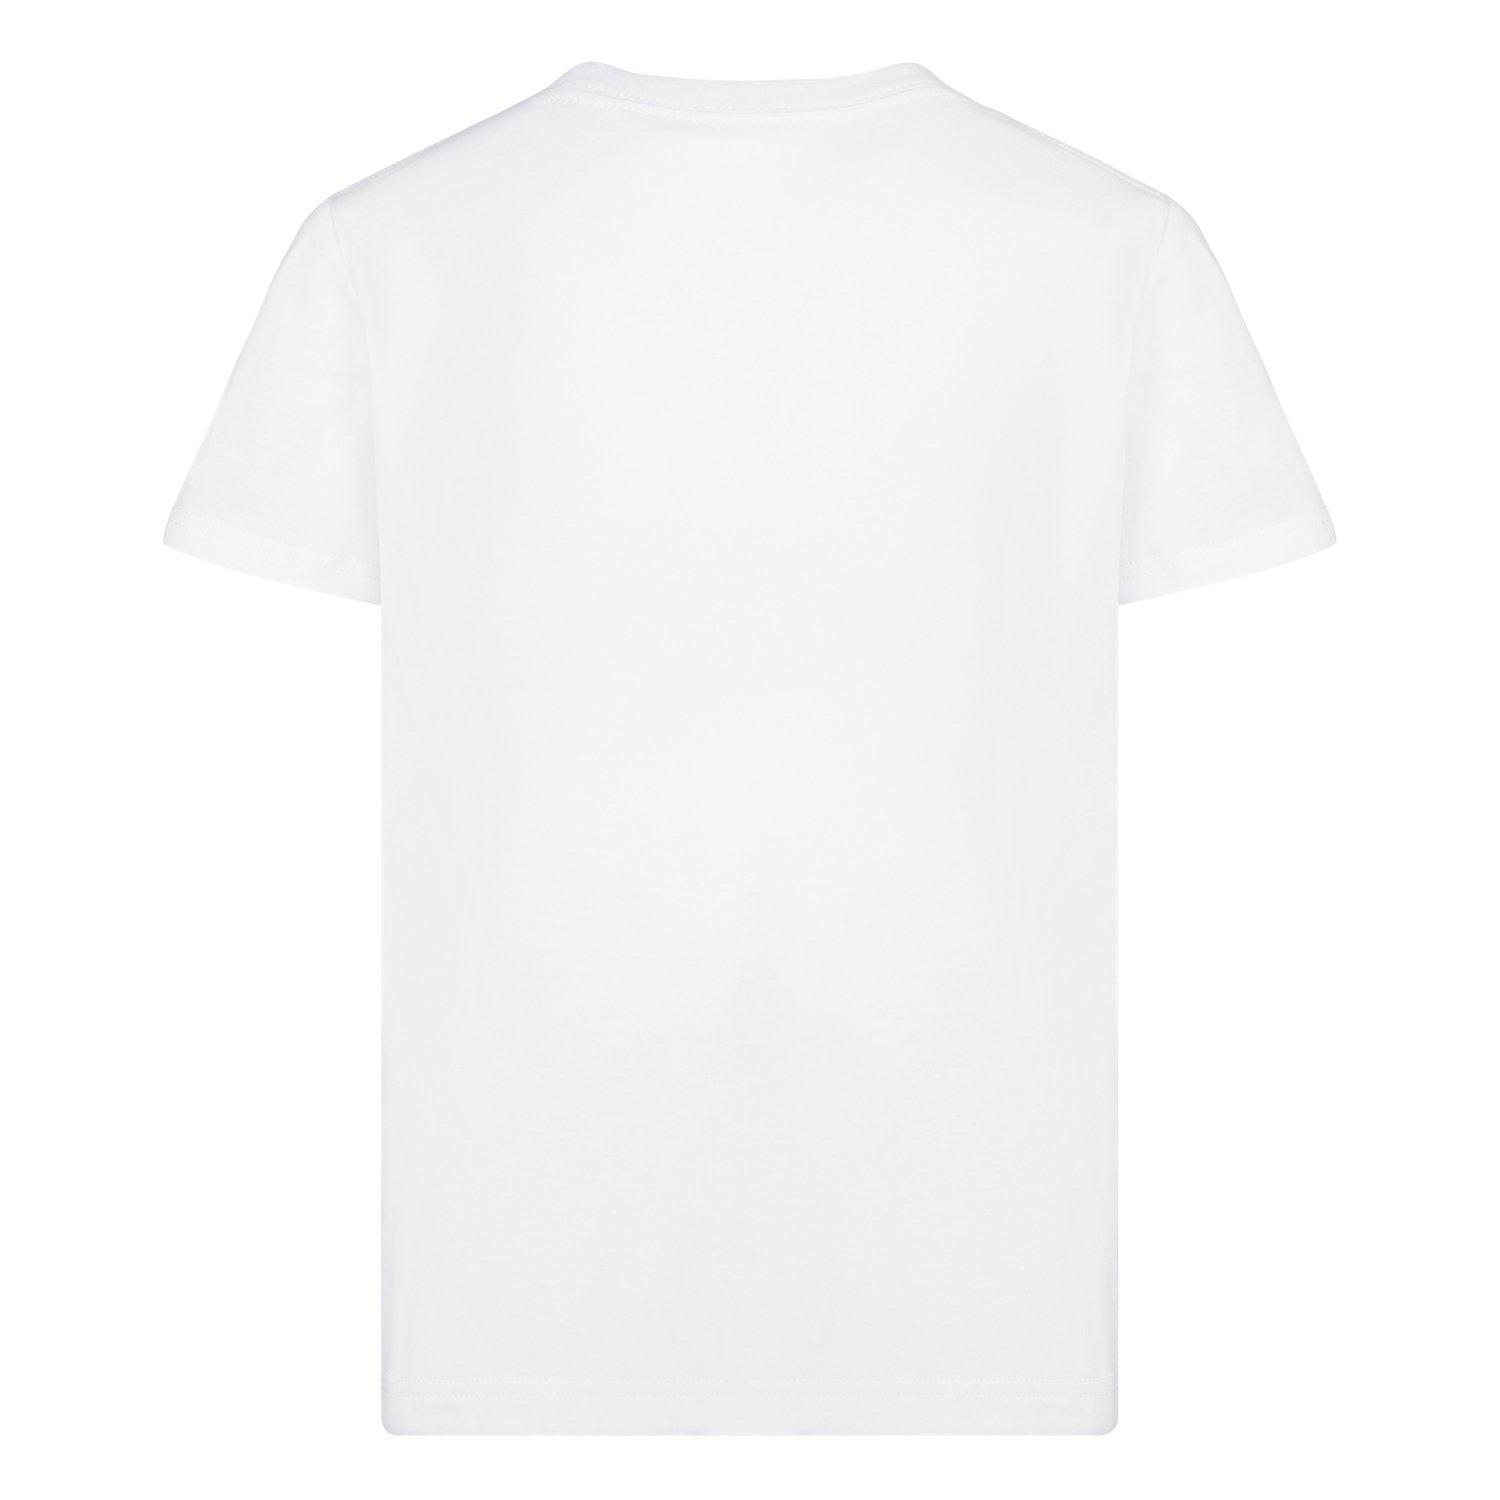 Nike Boys' 3BRAND by Russell Wilson Ballers Graphic T-shirt | Academy